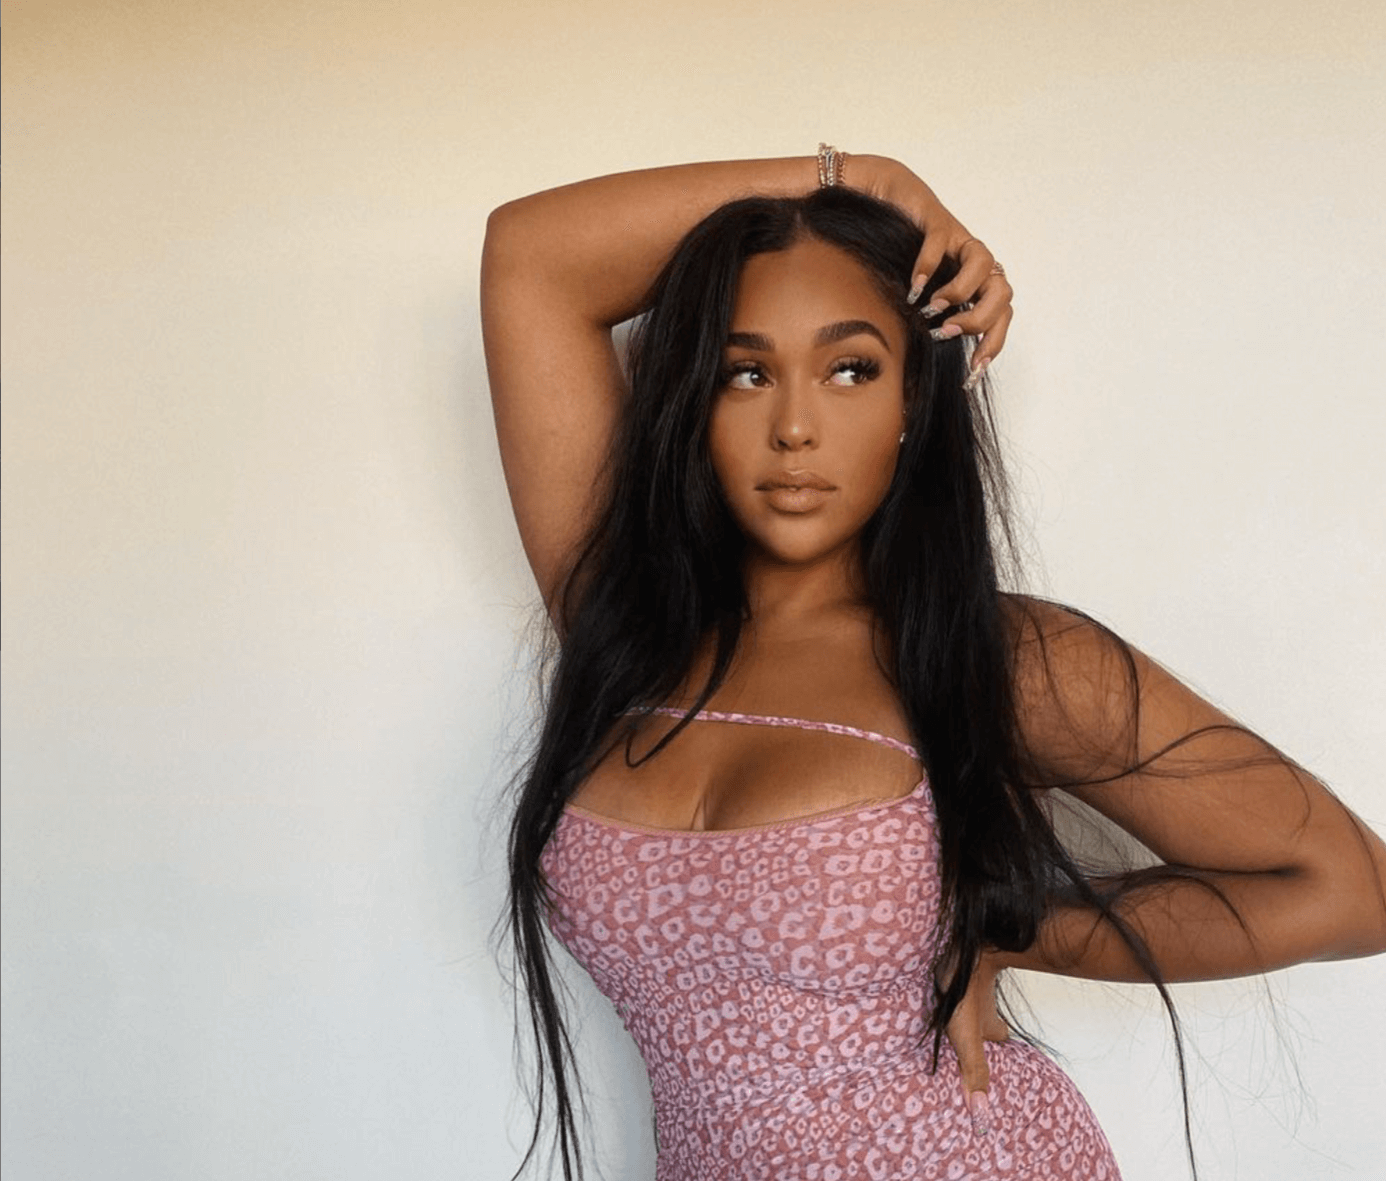 ”jordyn-woods-talks-about-her-fitness-journey-check-out-her-message”